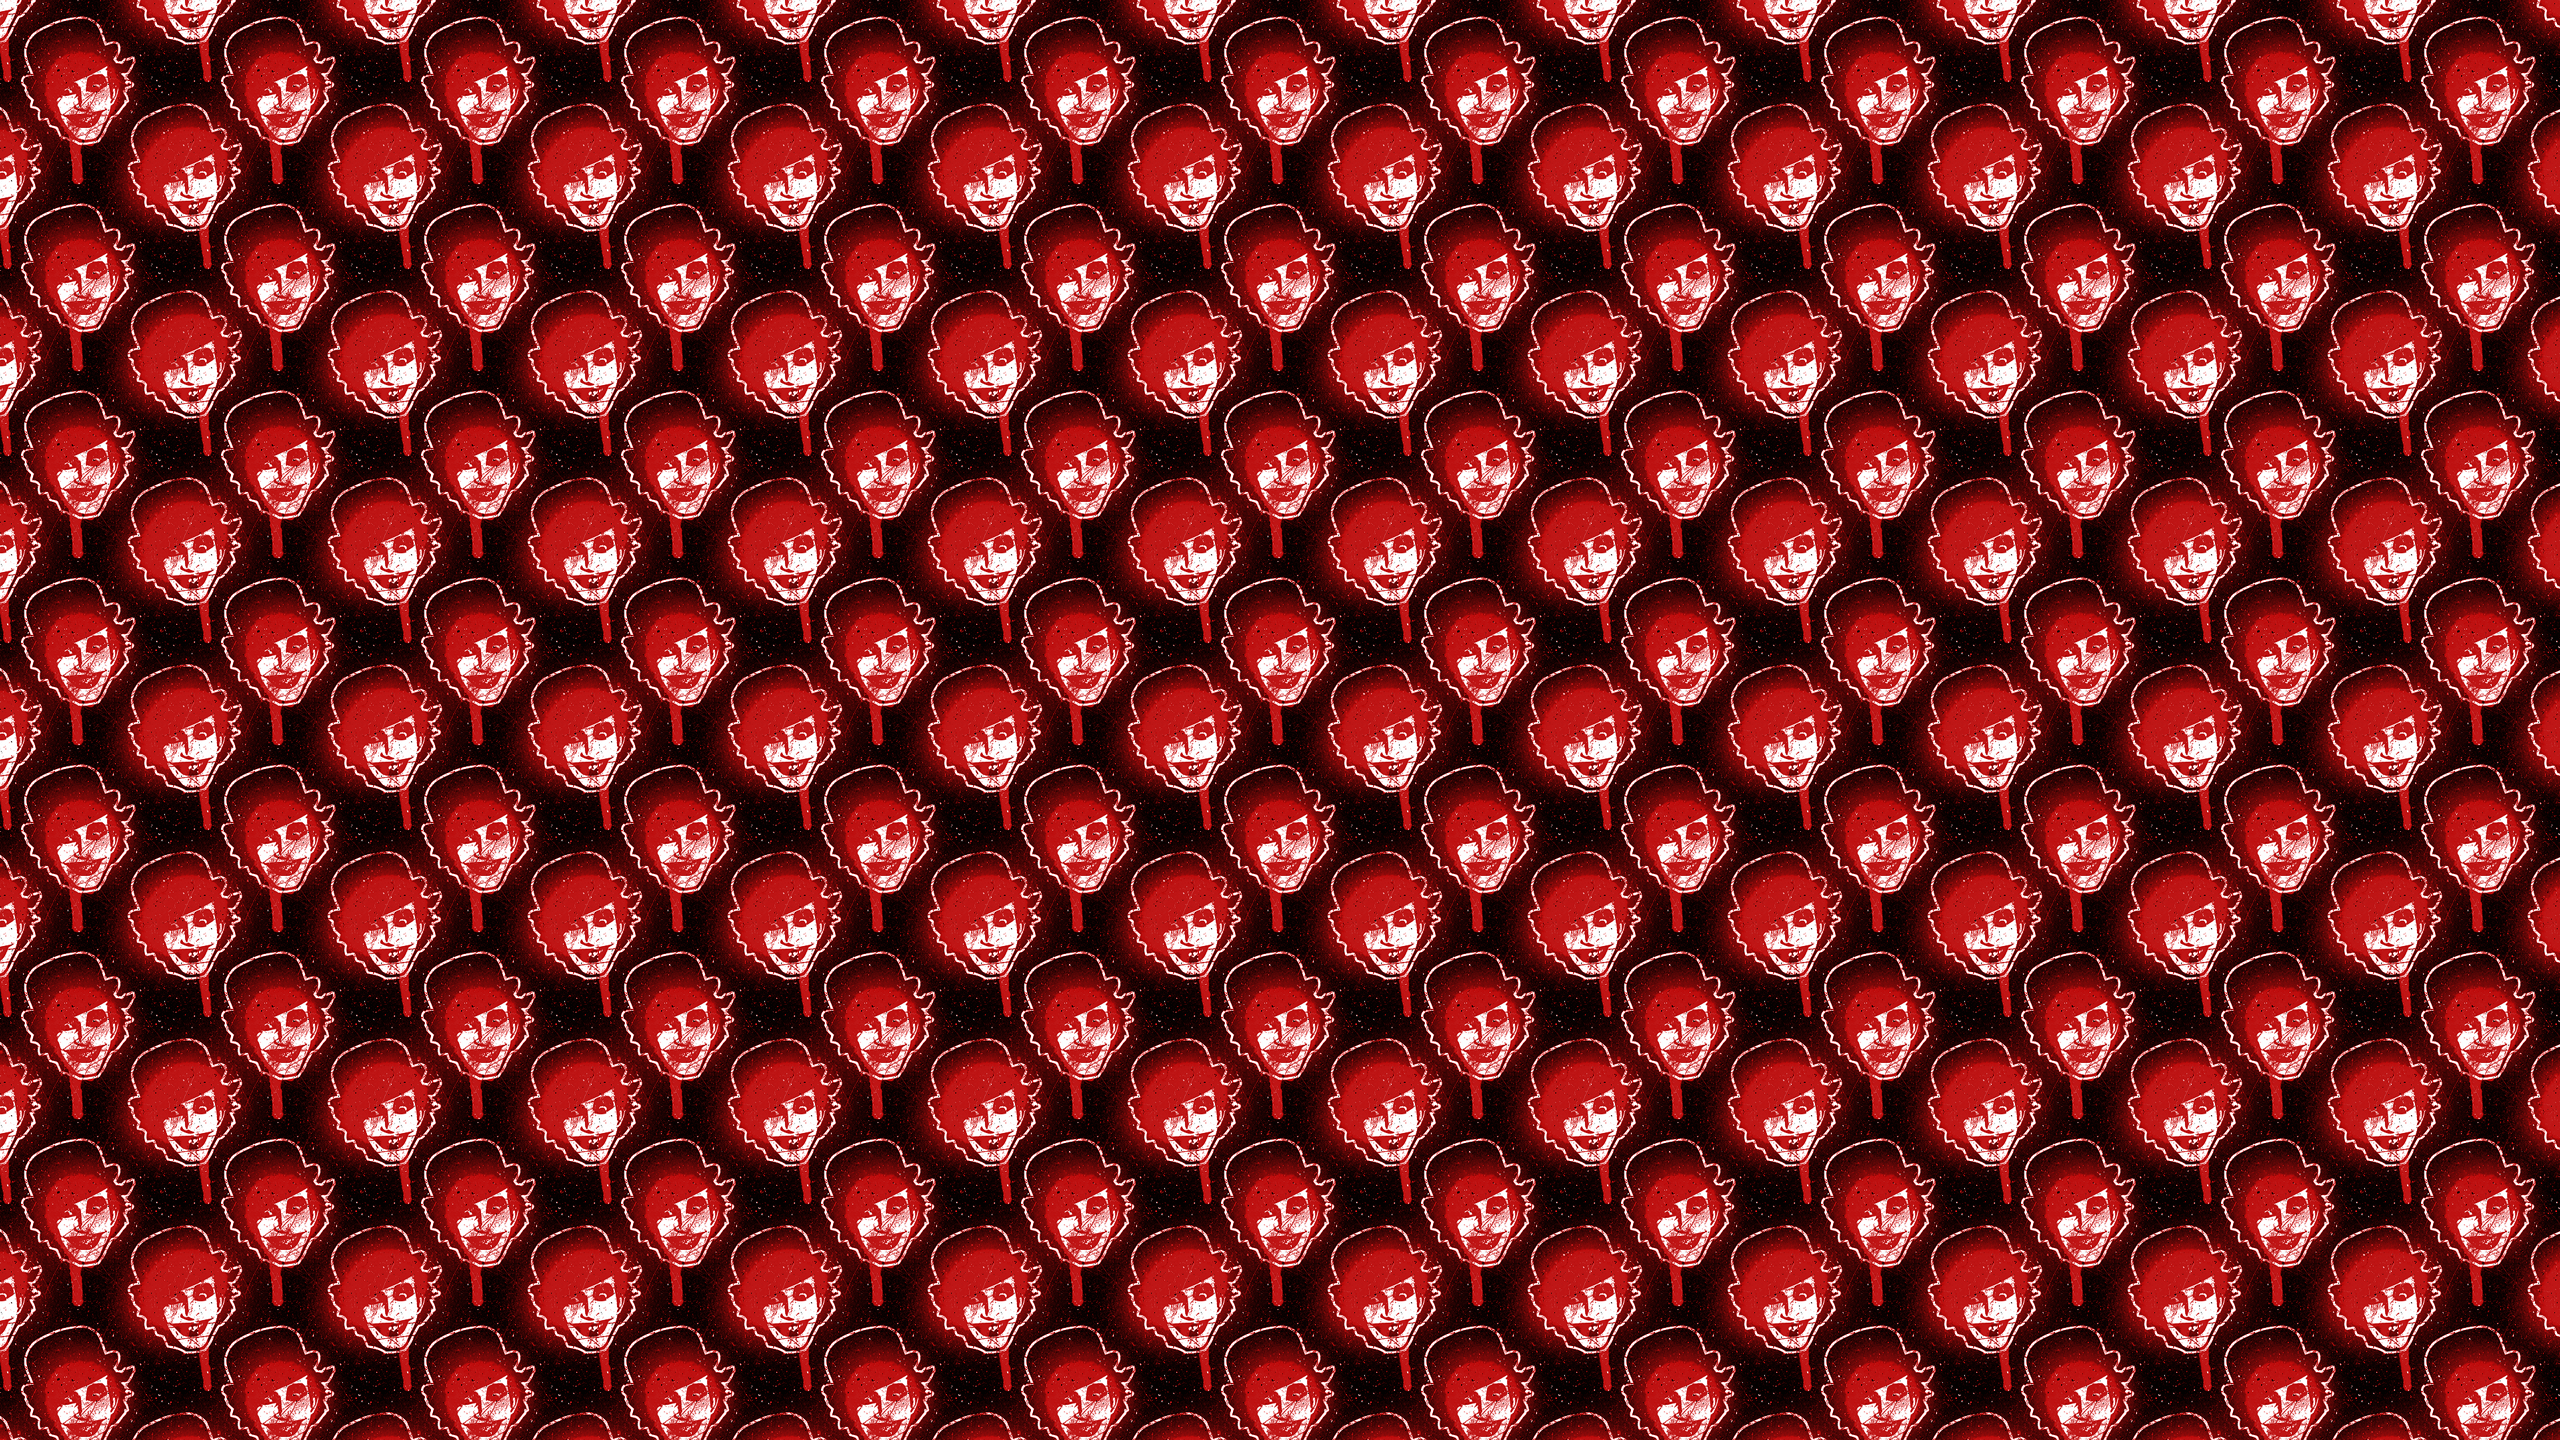 This Scary Clown Desktop Wallpaper Is Easy Just Save The